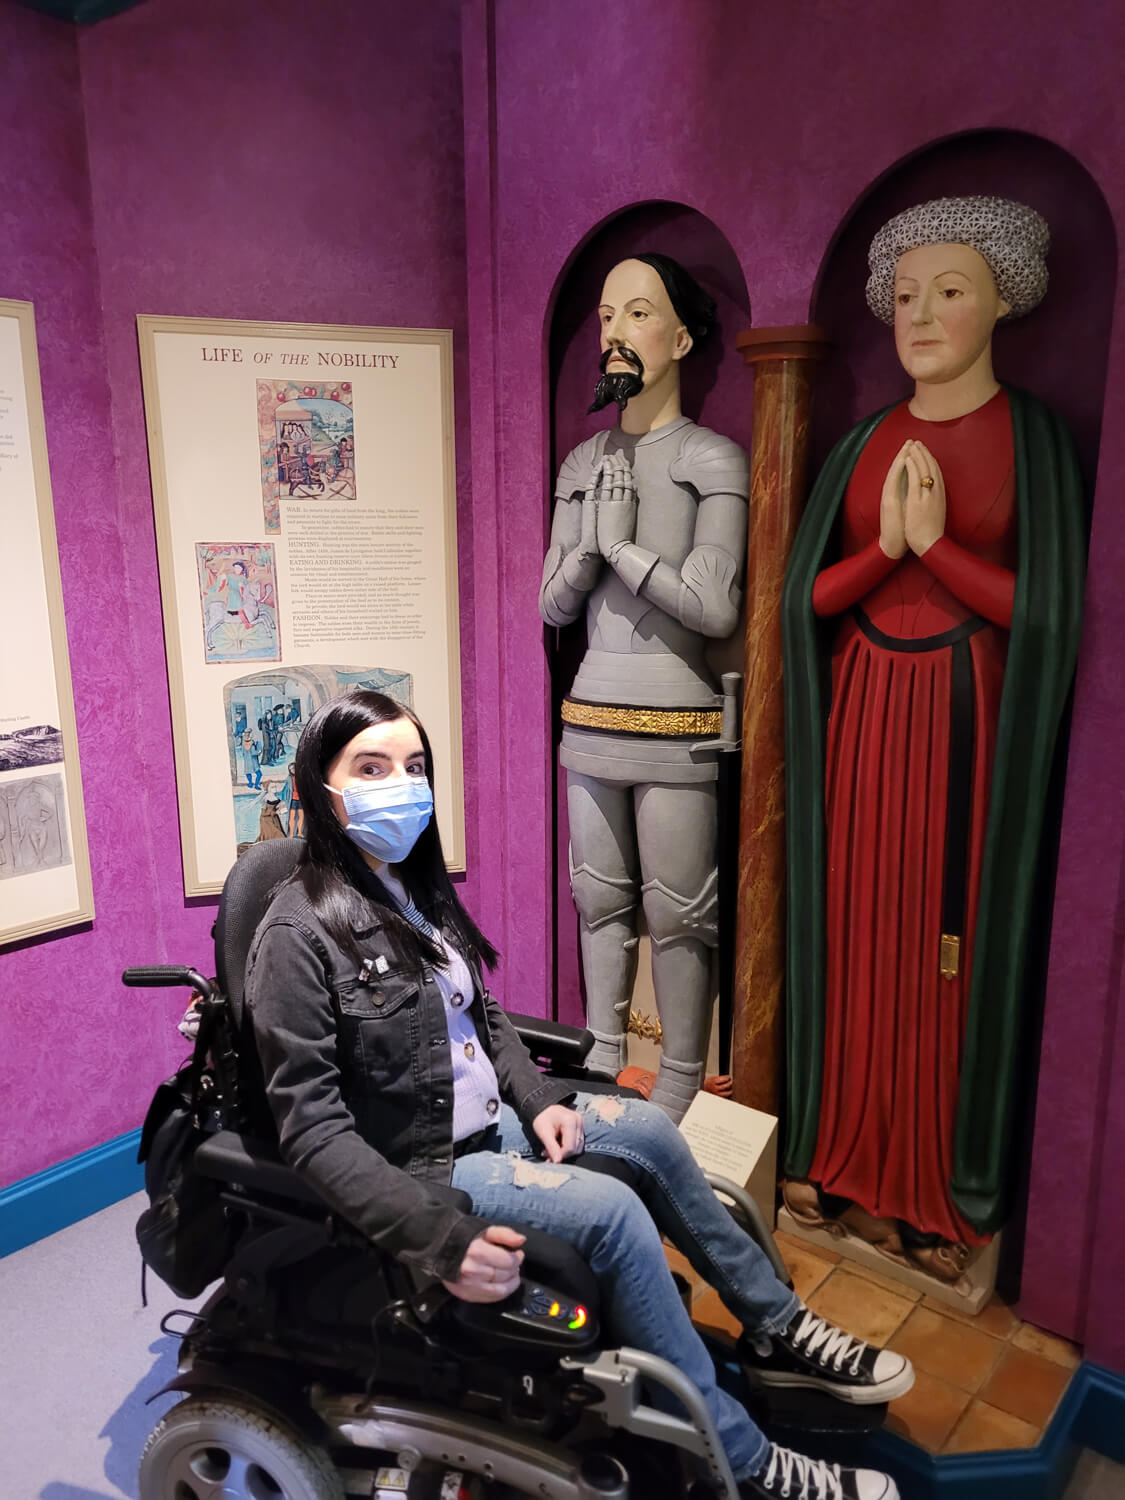 Emma sat in her wheelchair wearing a face mask. She is next to a display of medieval people.